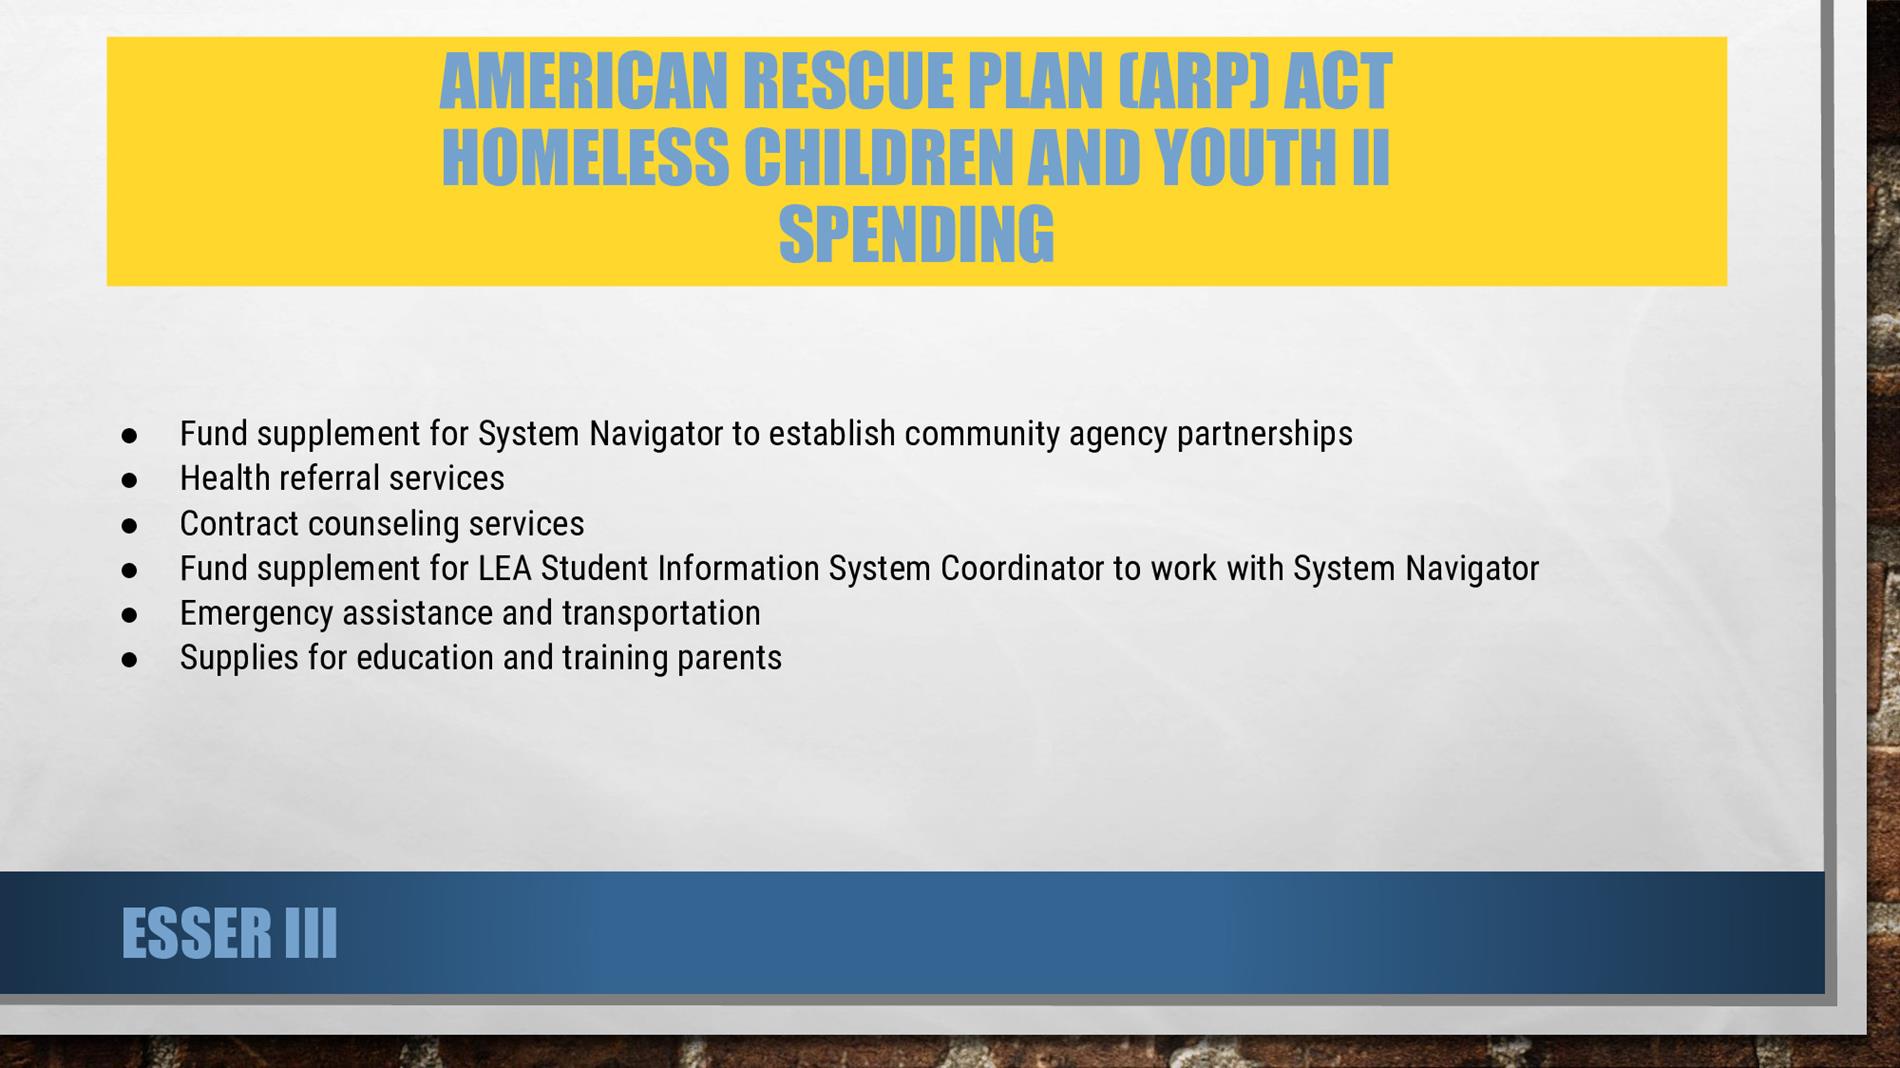 AMERICAN RESCUE PLAN (ARP) ACT HOMELESS CHILDREN AND YOUTH II SPENDING